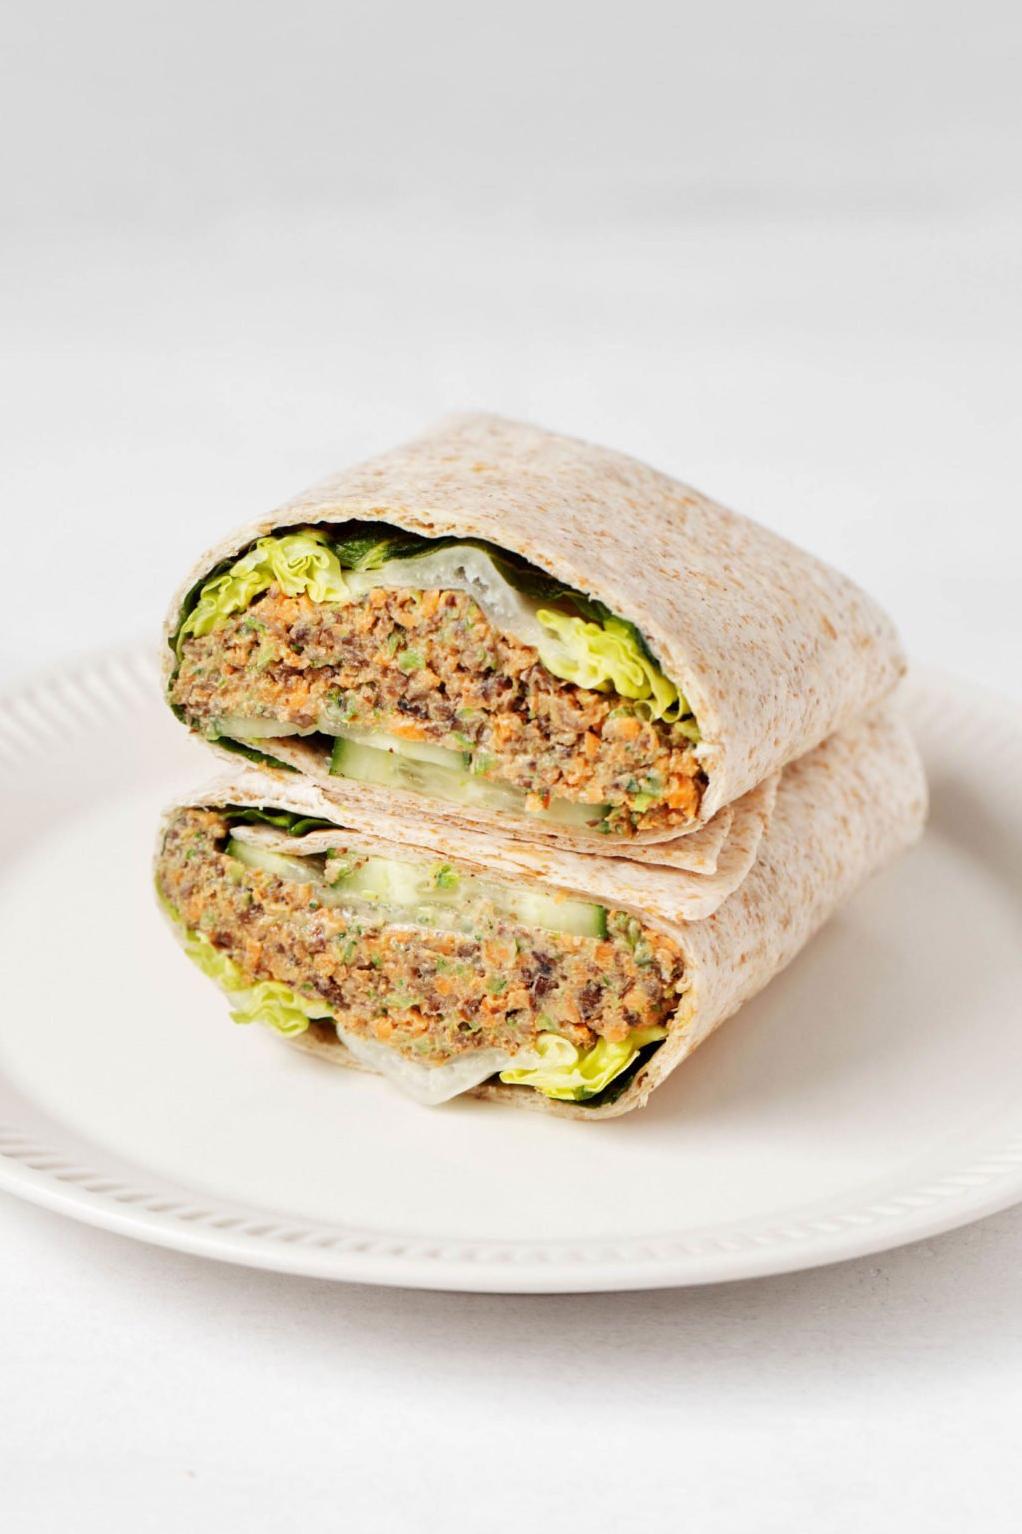  Looking for a vegetarian lunch option? Try these delicious and easy-to-make Lentil and Roasted Vegetable Wraps.